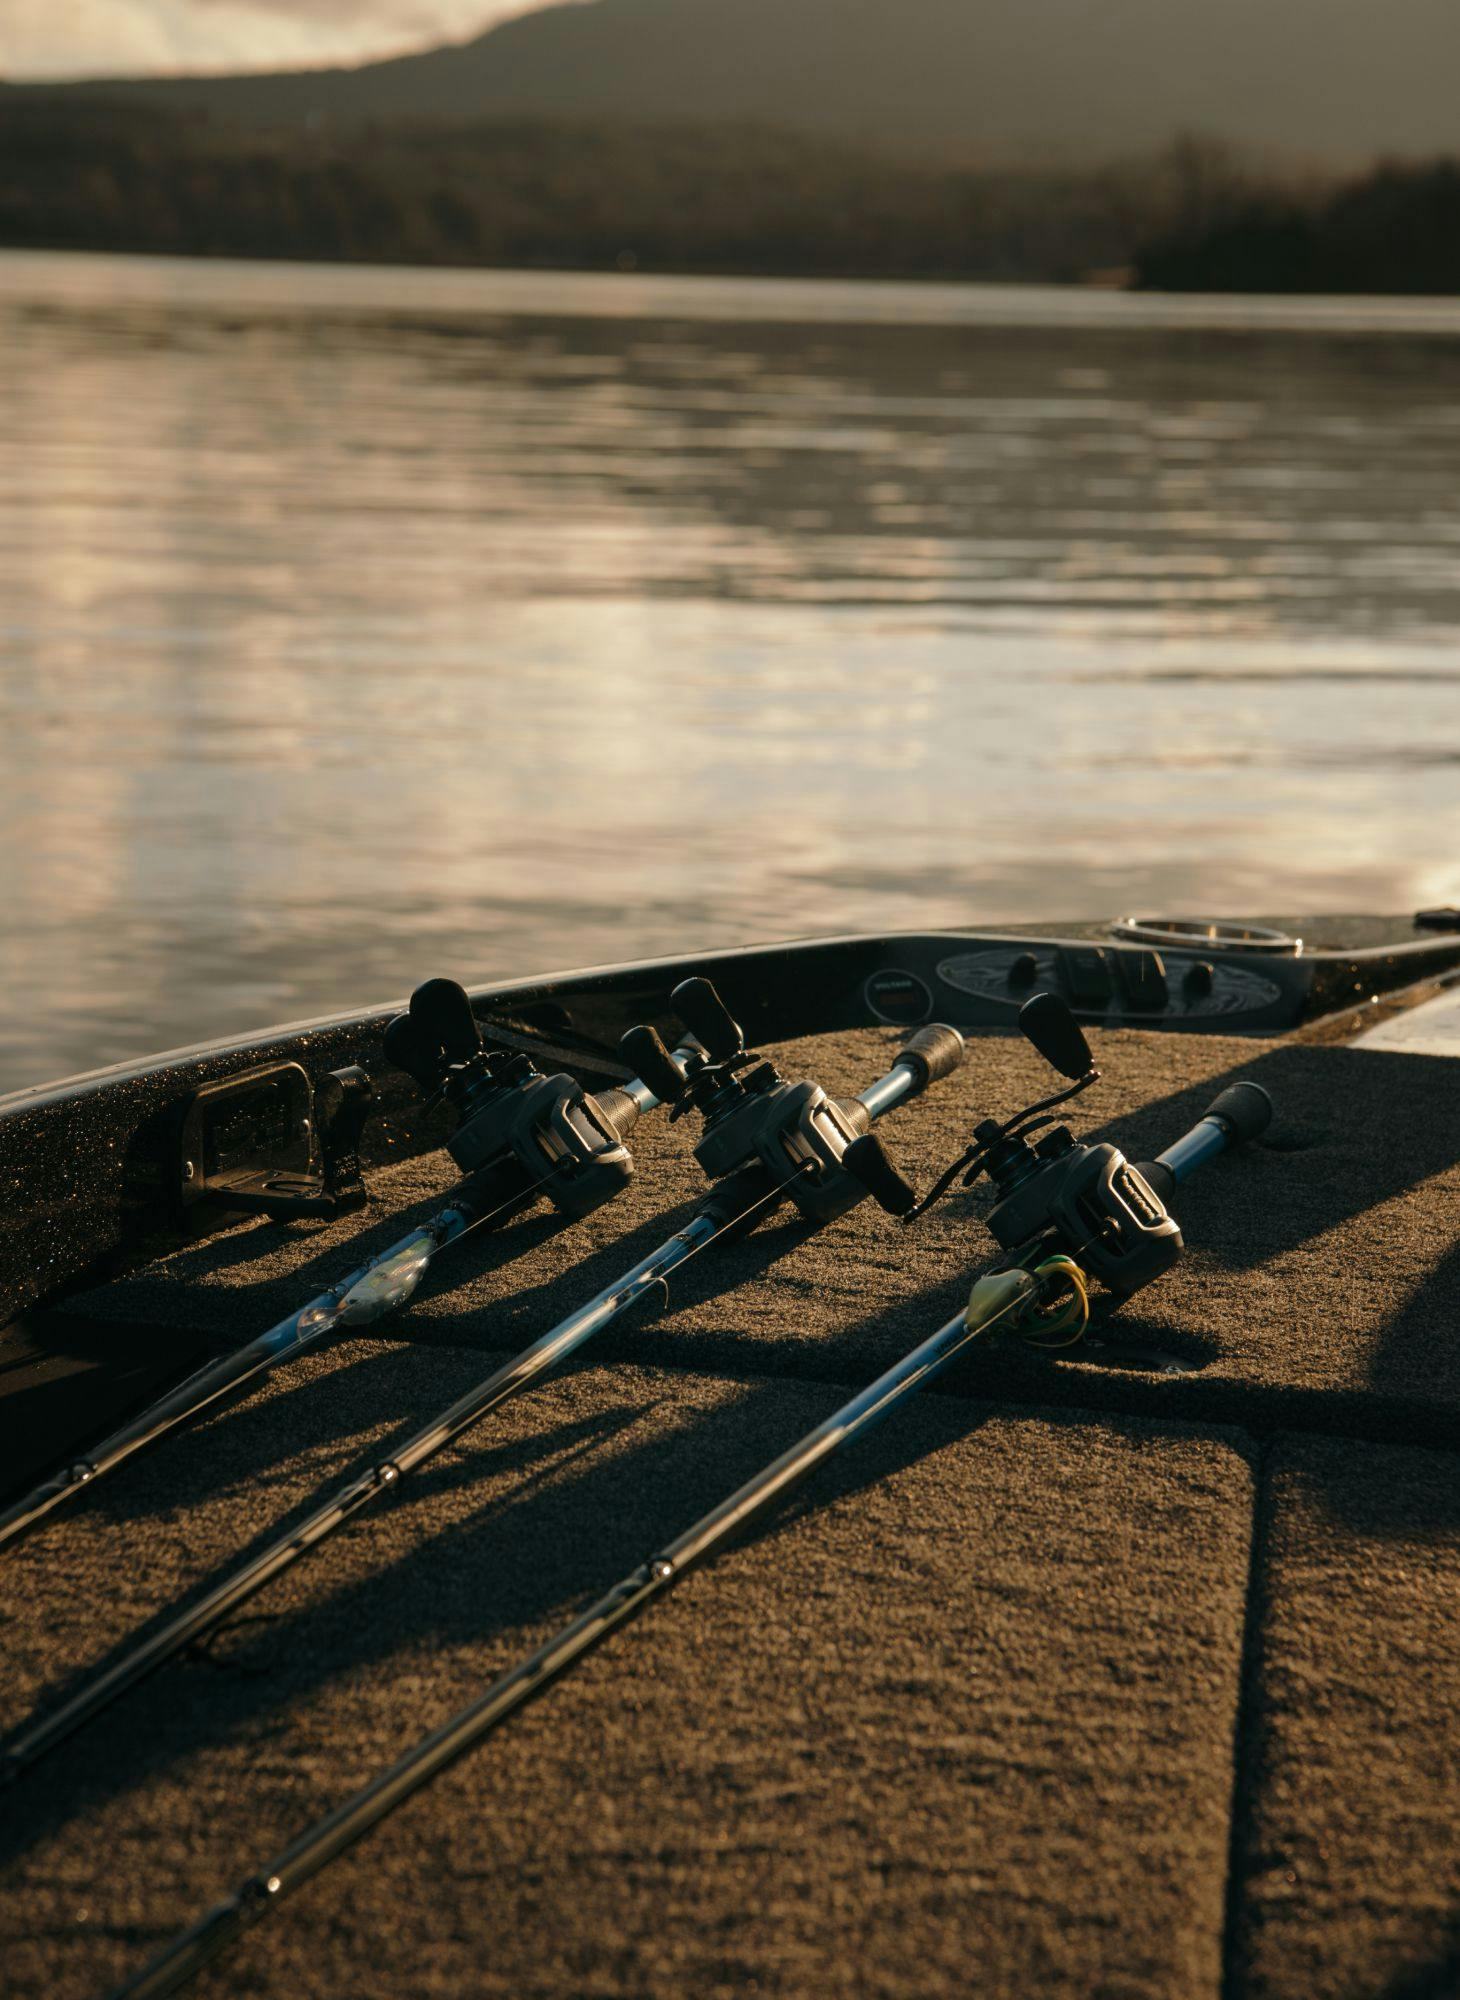 Three fishing poles on the deck of a fishing boat on a lake